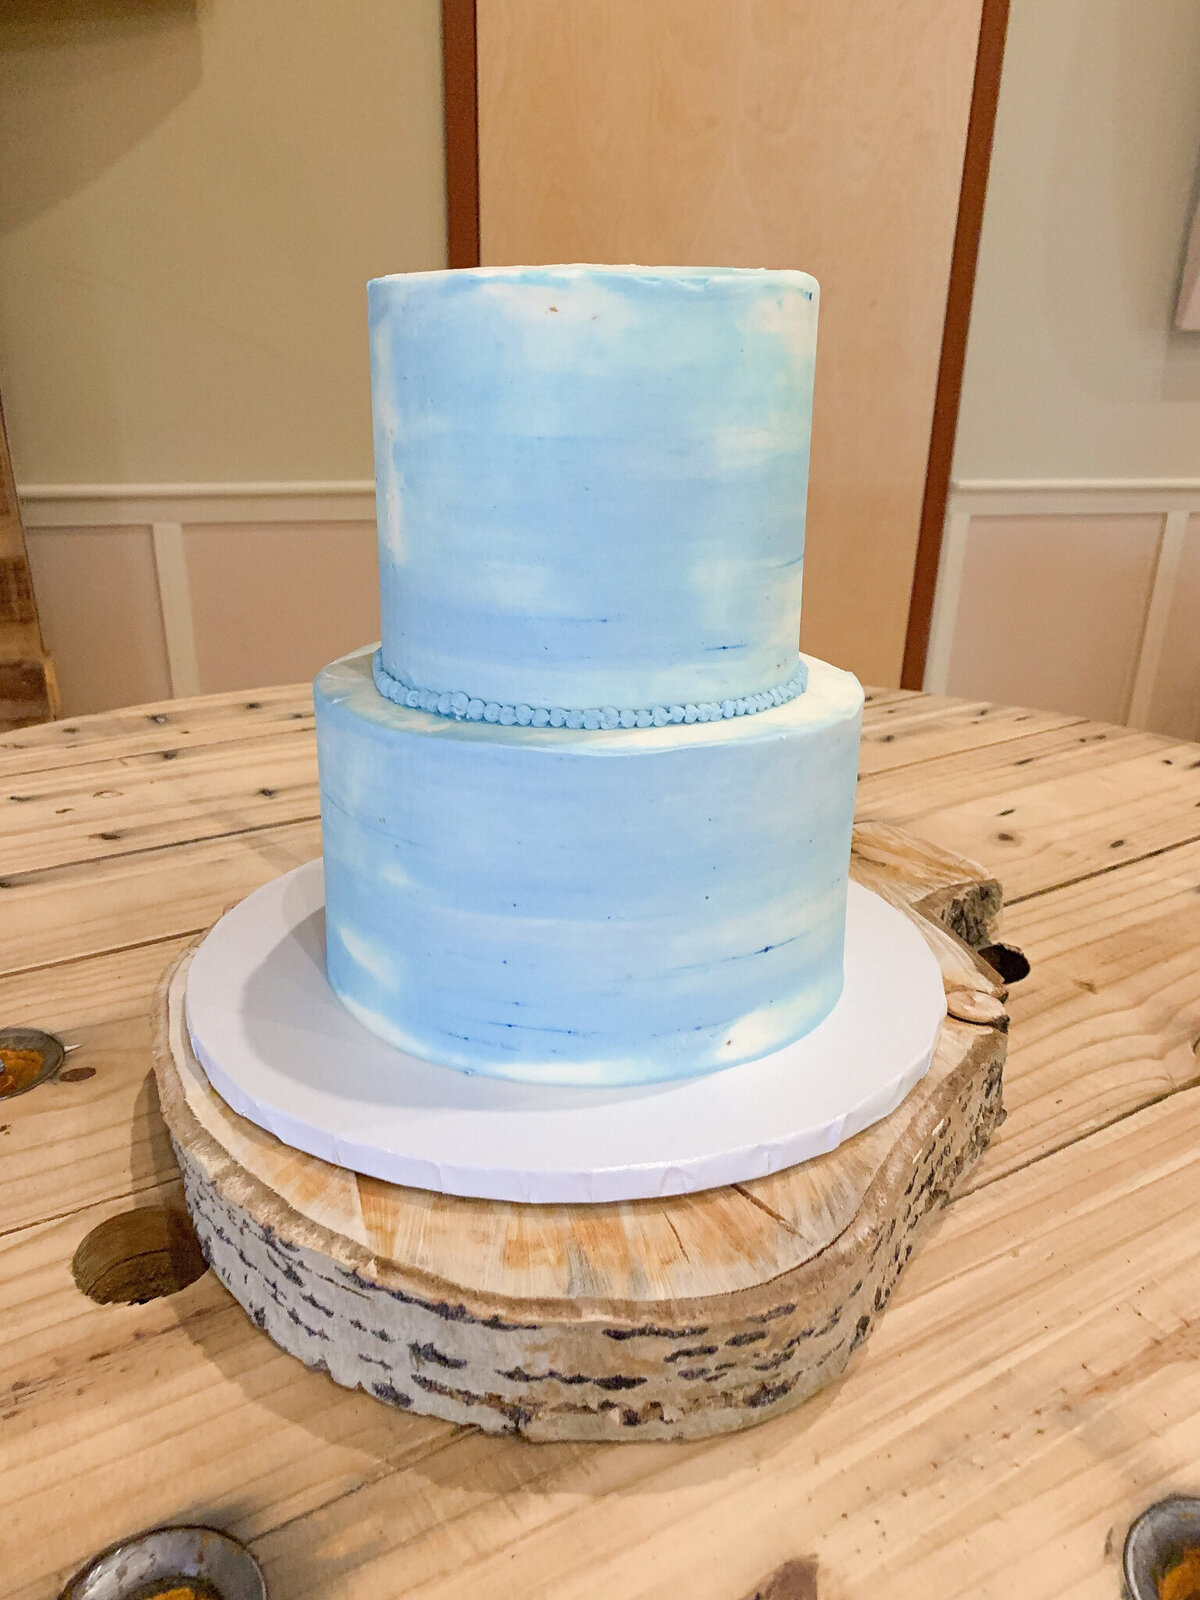 2-tiered blue wedding cake by Sweets By Sue in Lethbridge, Alberta, featured on the Brontë Bride Vendor Guide.